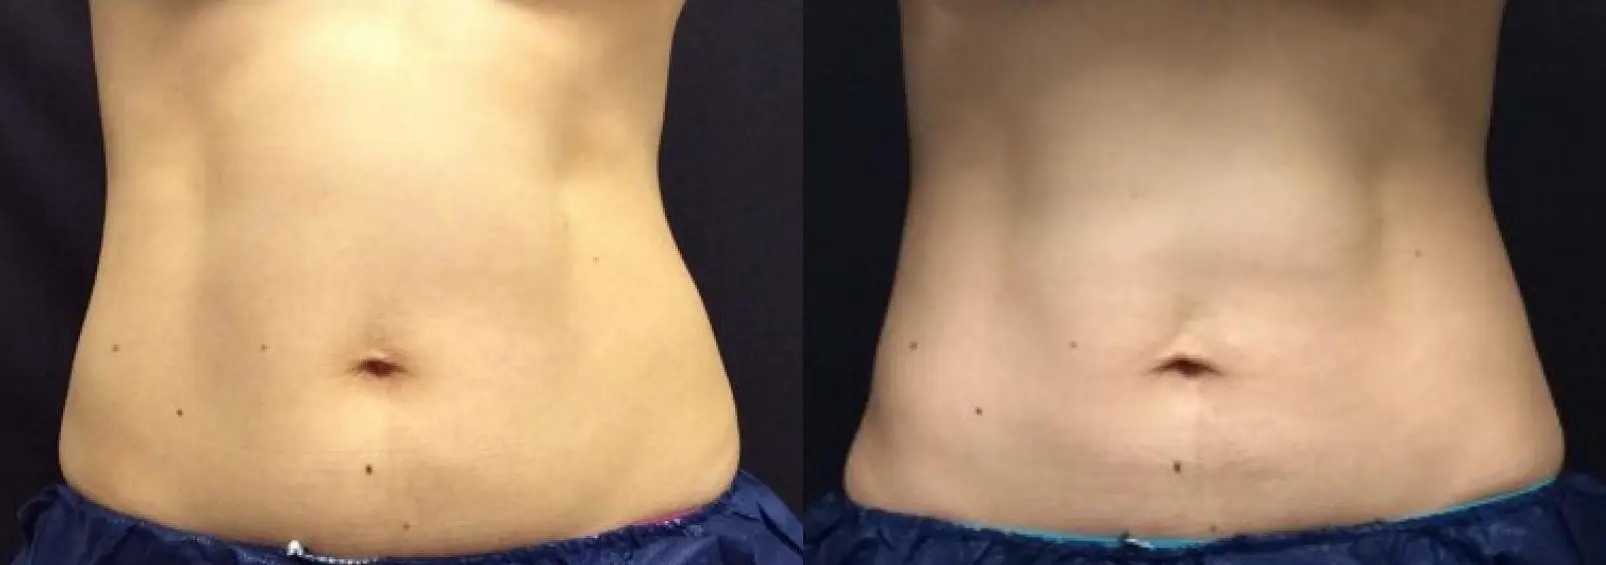 CoolSculpting Elite, reducing fat to sculpt her waist, before and after